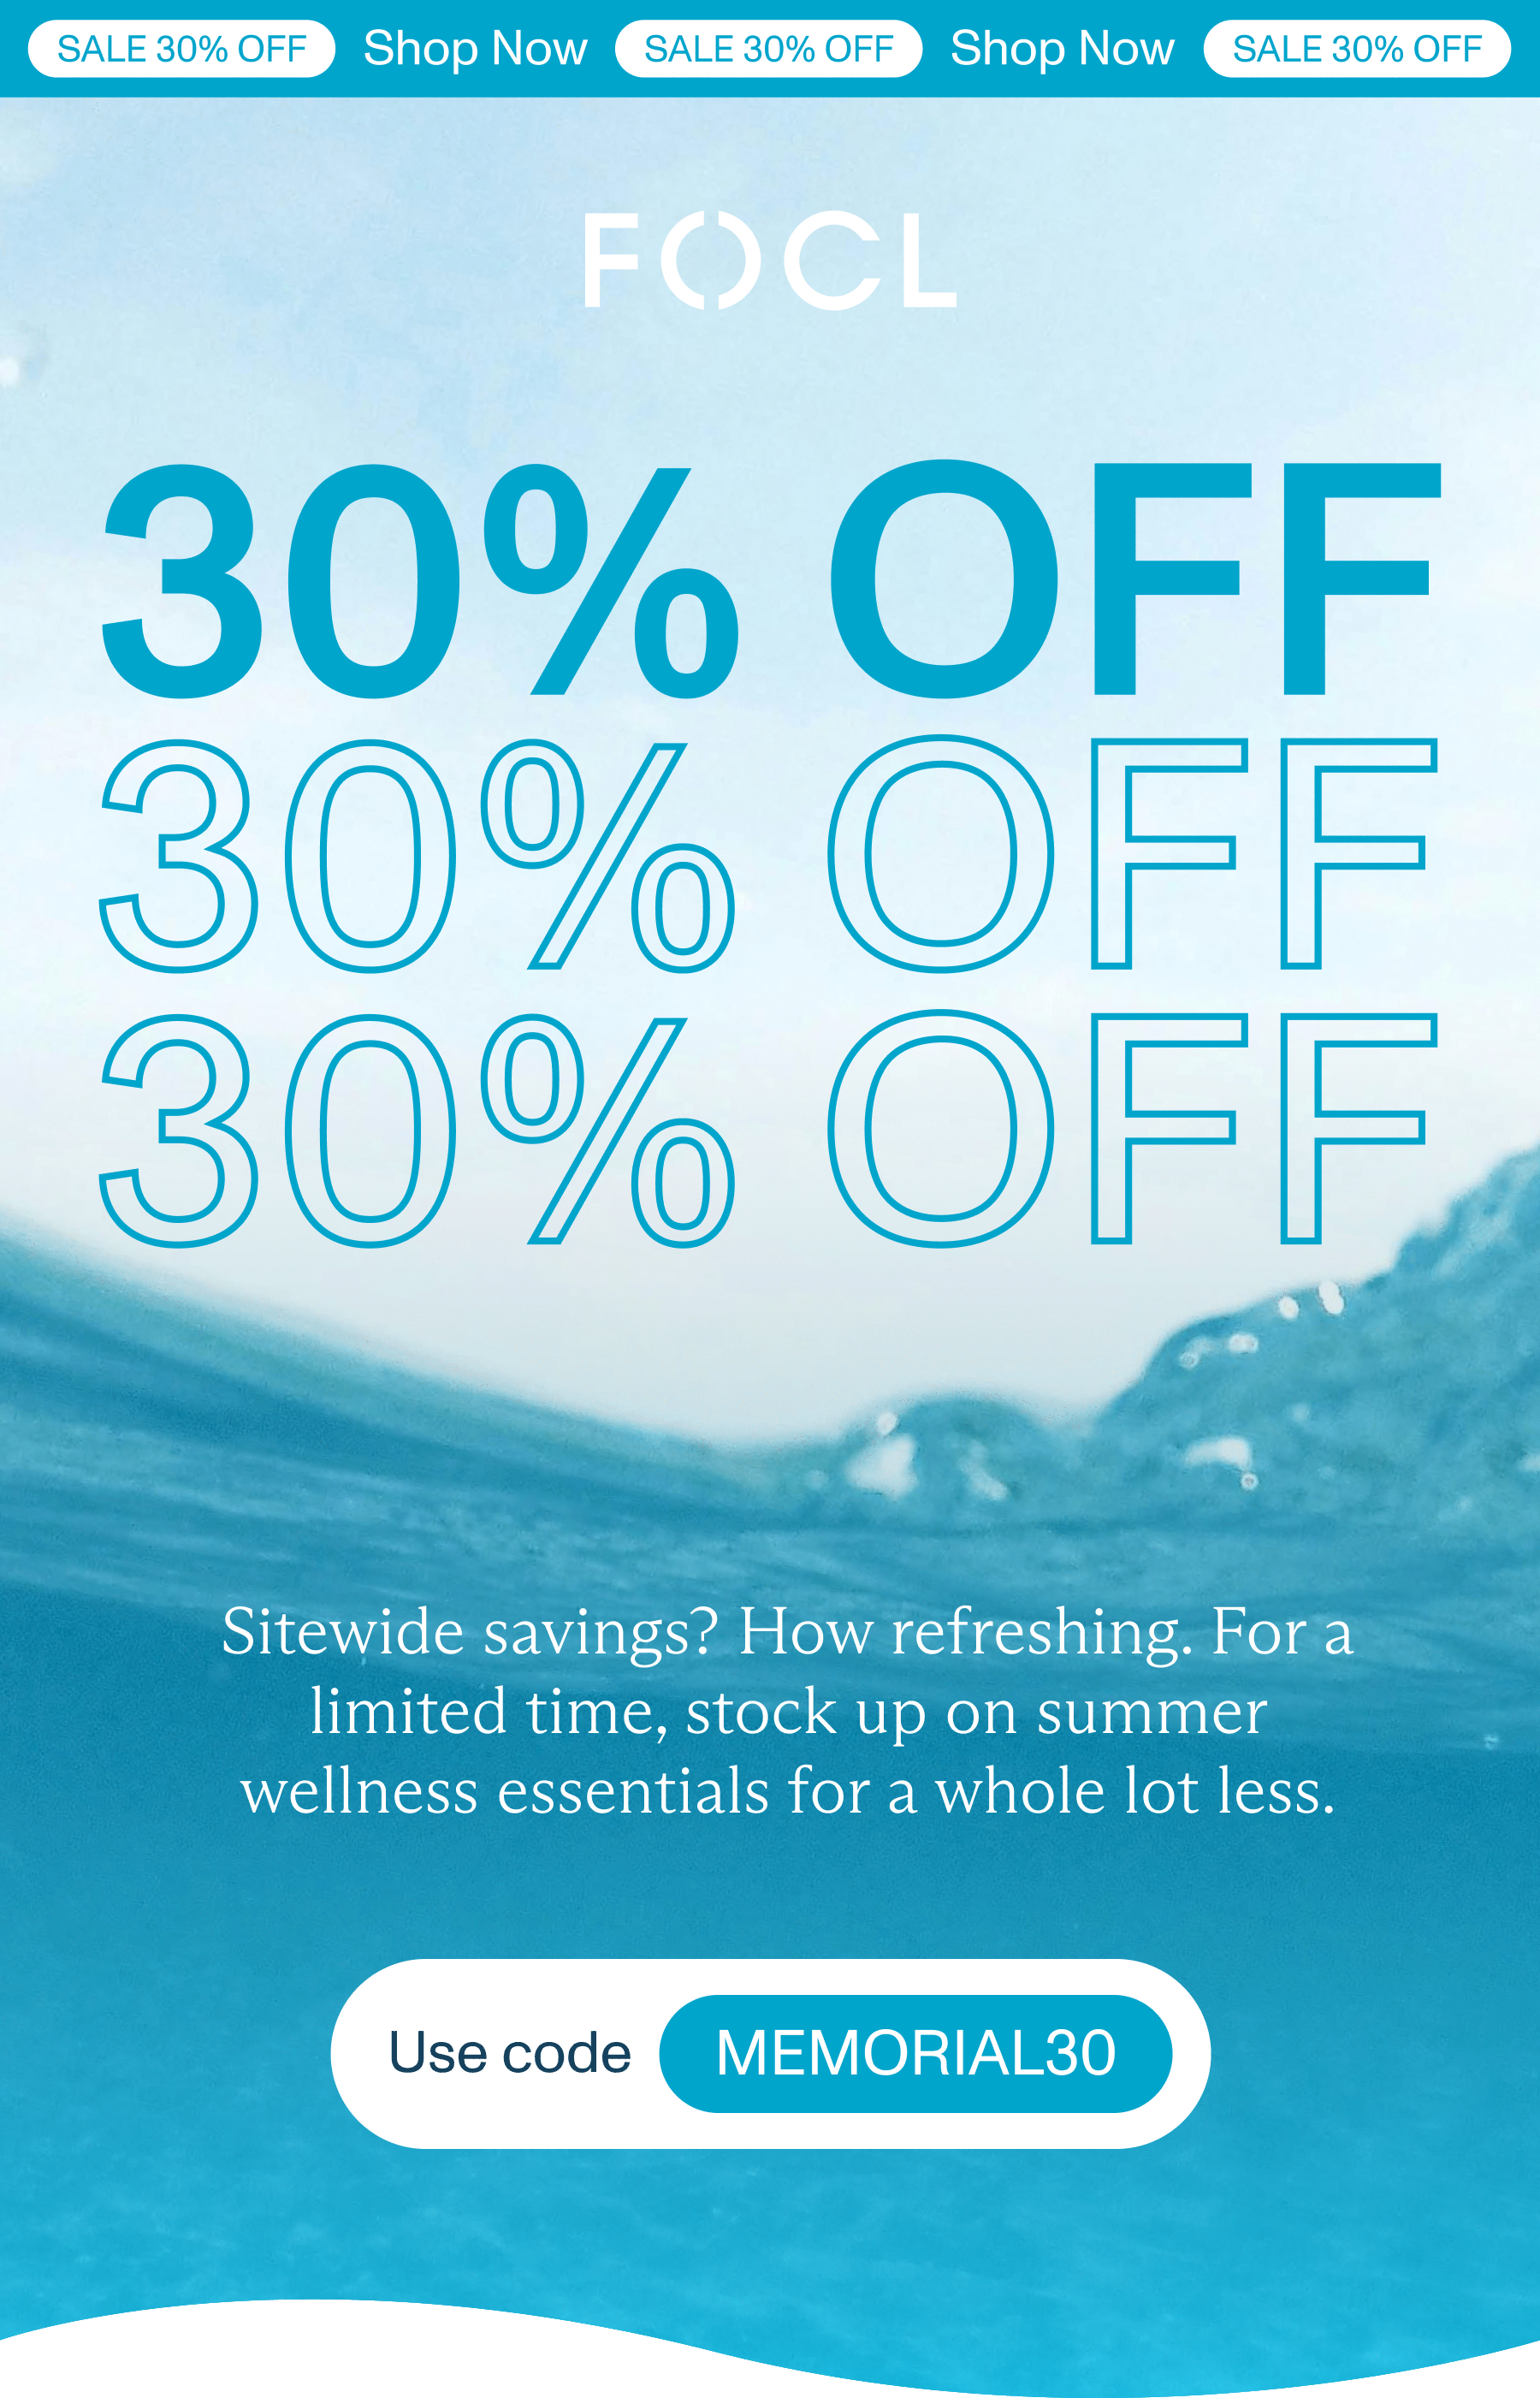 Image shows a marketing email from FOCL in which the main image—text that reads “30% off” 3 times in a row—flashes.